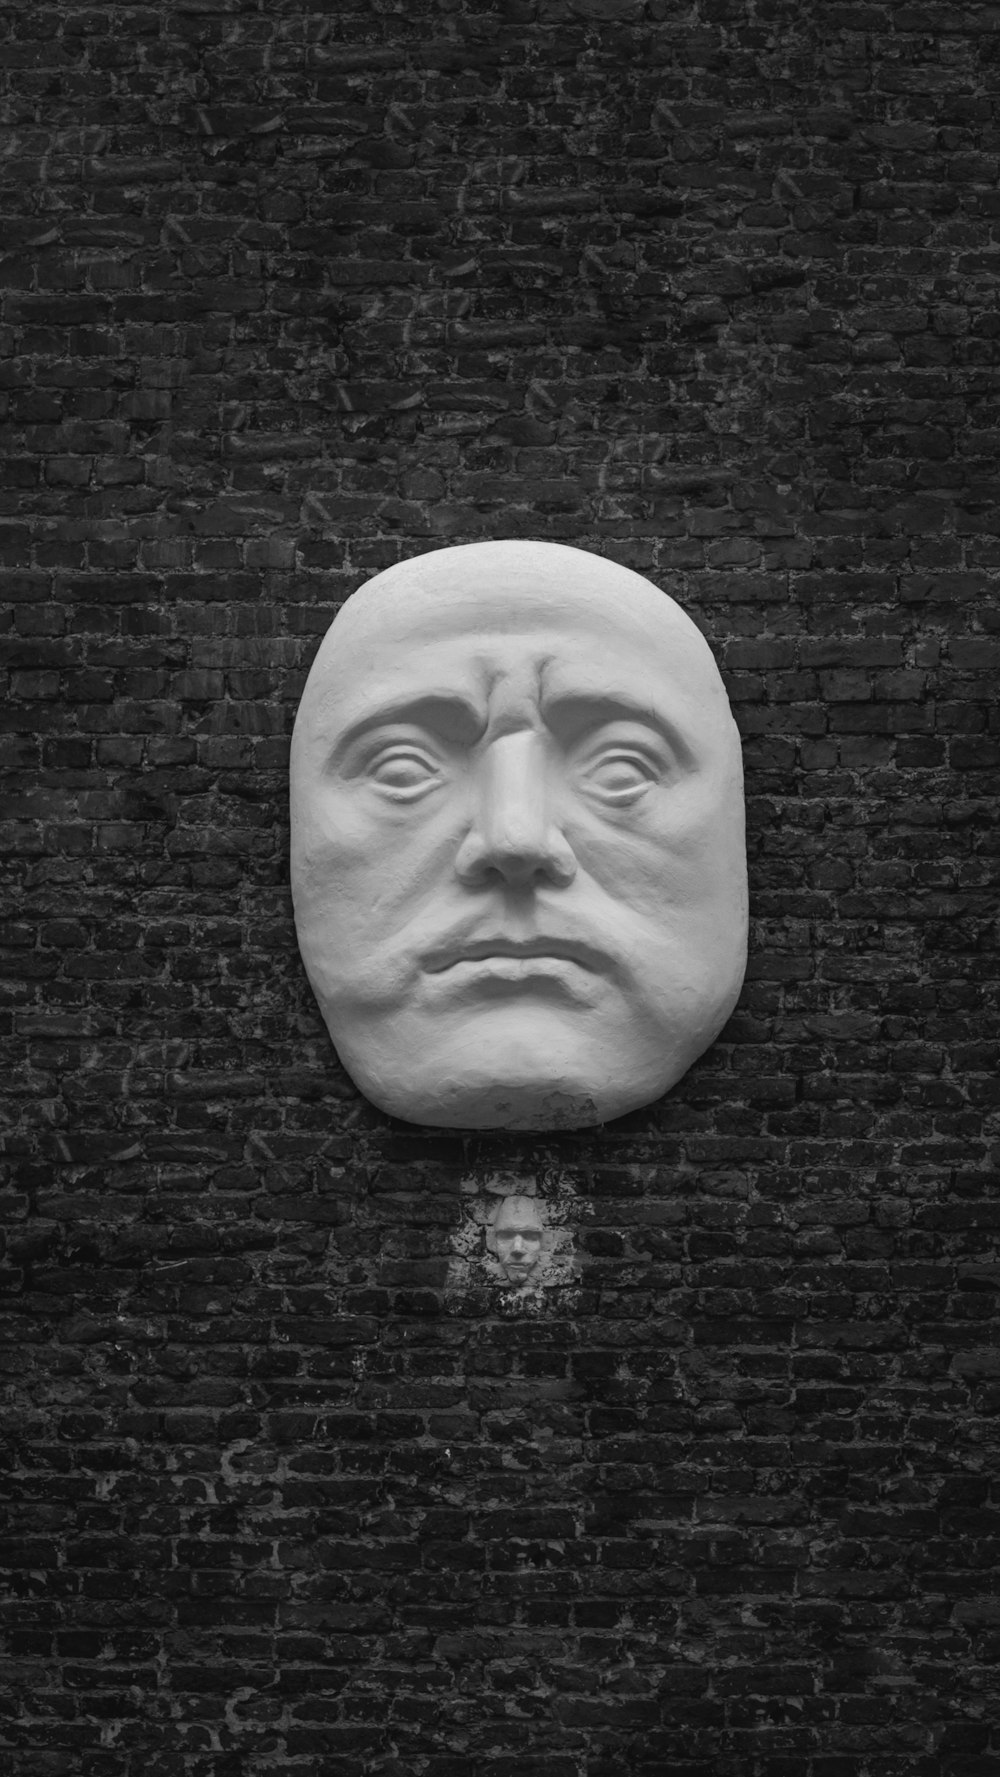 a black and white photo of a face on a brick wall